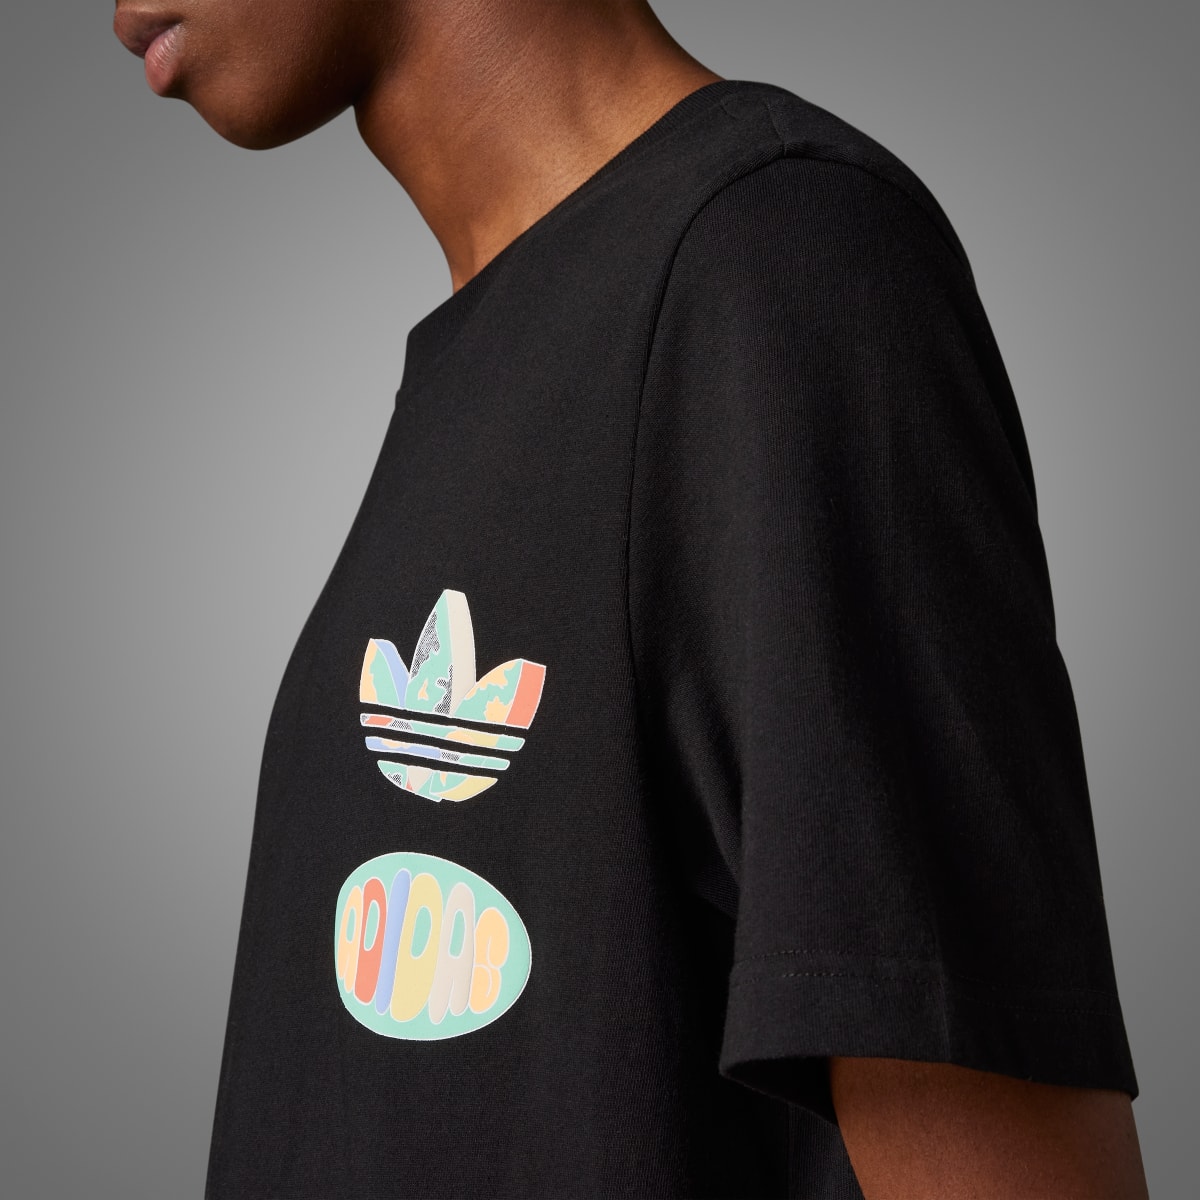 Adidas Enjoy Summer Front/Back Graphic Tee. 7